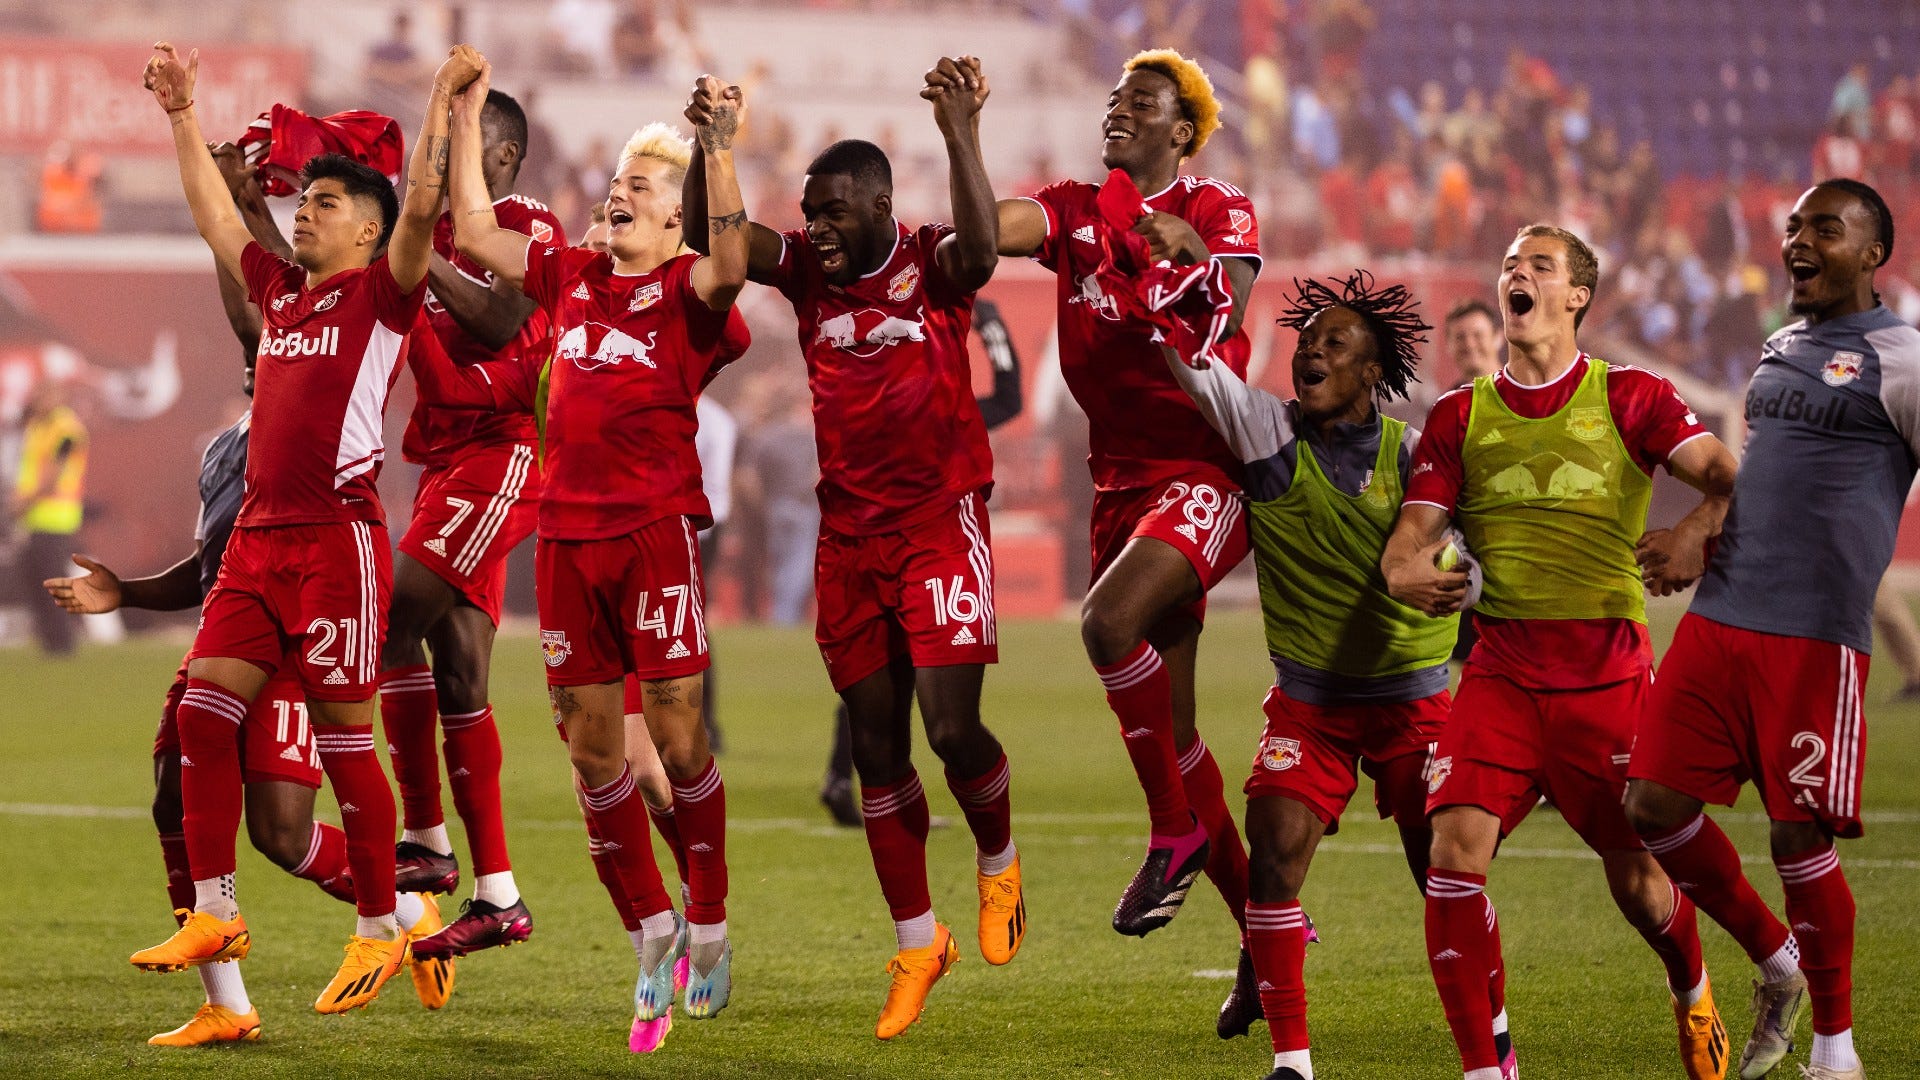 New York Red Bulls vs San Luis Live stream, TV channel, kick-off time and where to watch Goal US